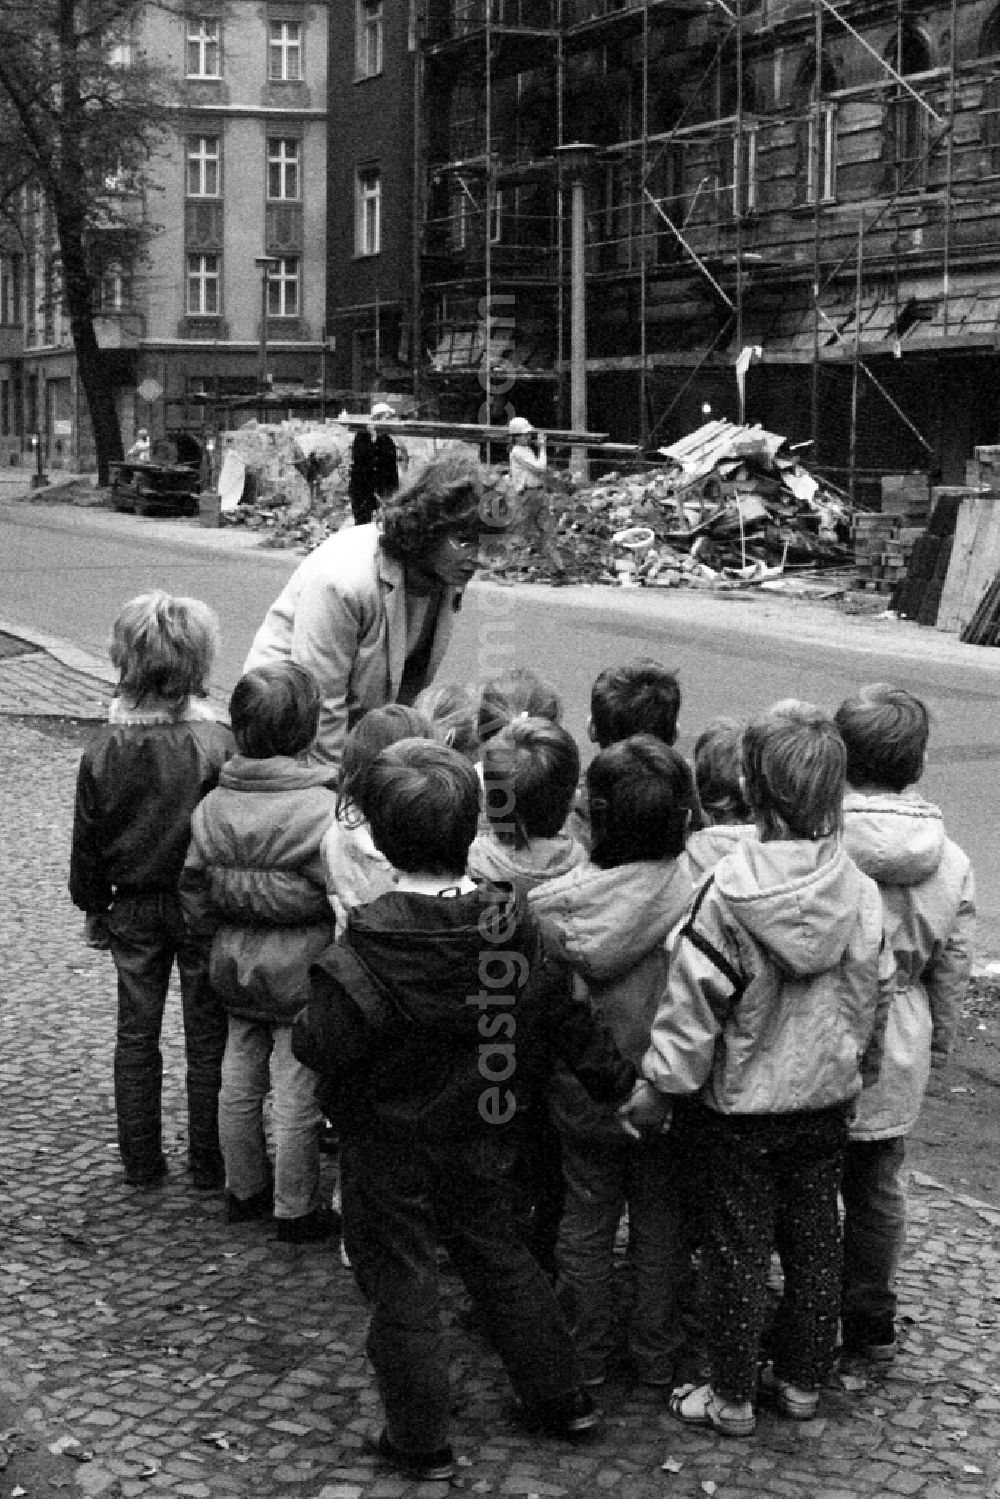 GDR image archive: Berlin - Traffic education kindergarten in Berlin Eastberlin on the territory of the former GDR, German Democratic Republic. Kindergarten teacher is standing together with children on a street, children are listening attentively